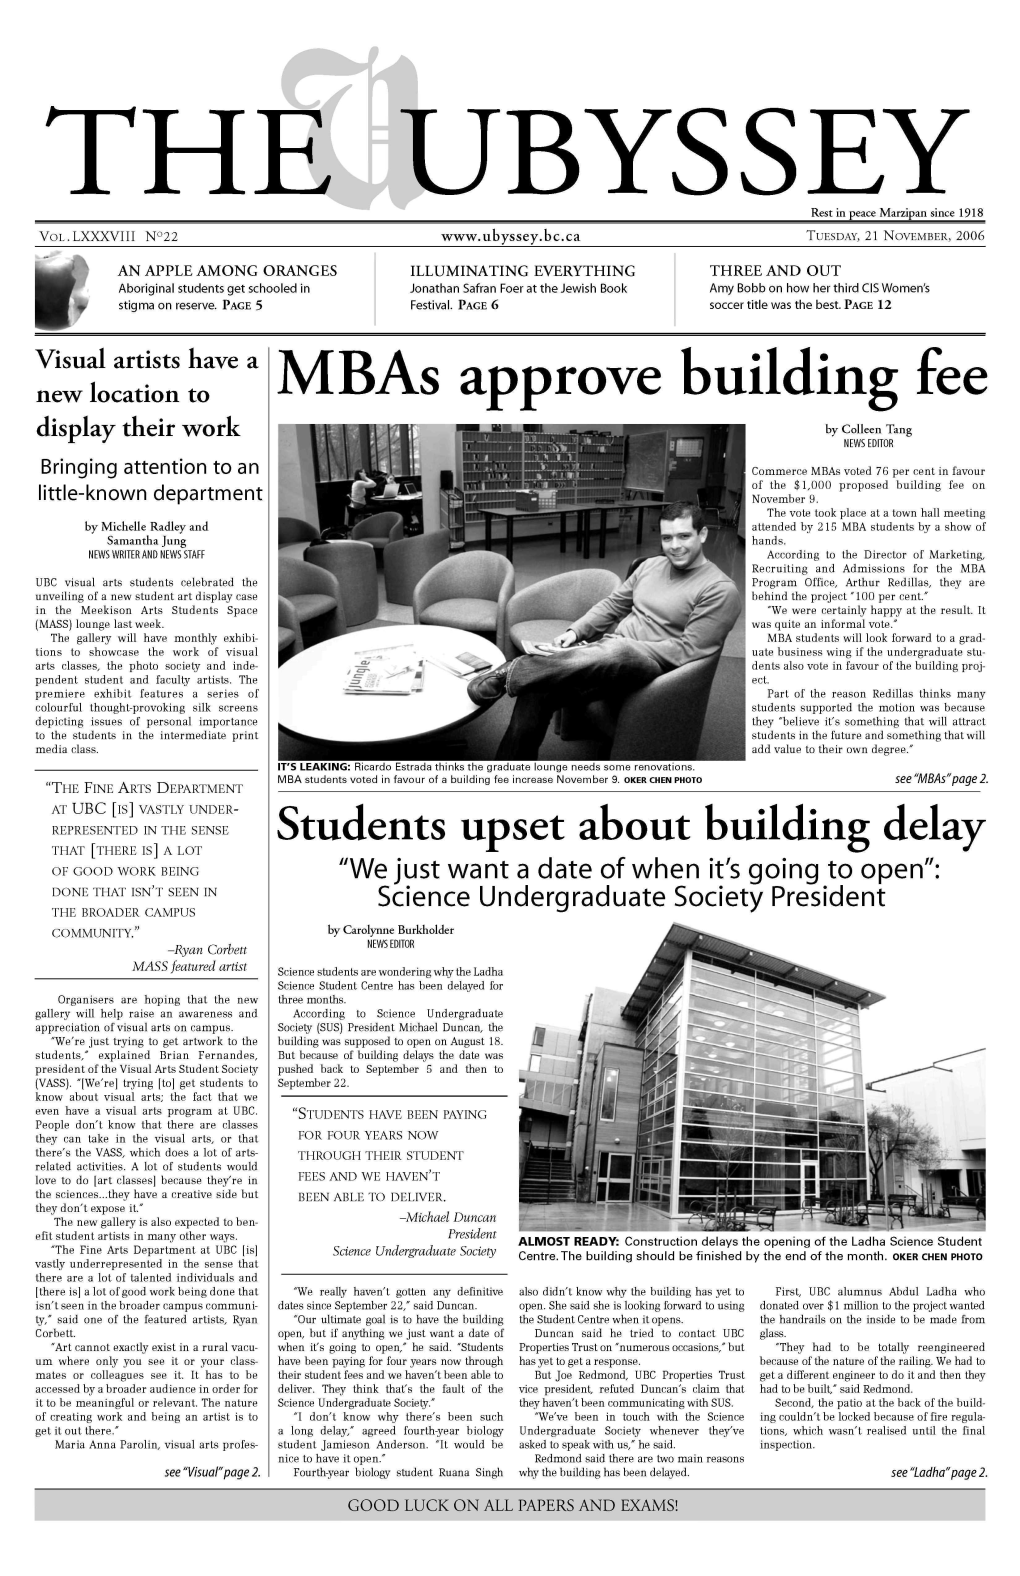 Mbas Approve Building Fee Display Their Work by Colleen Tang NEWS EDITOR